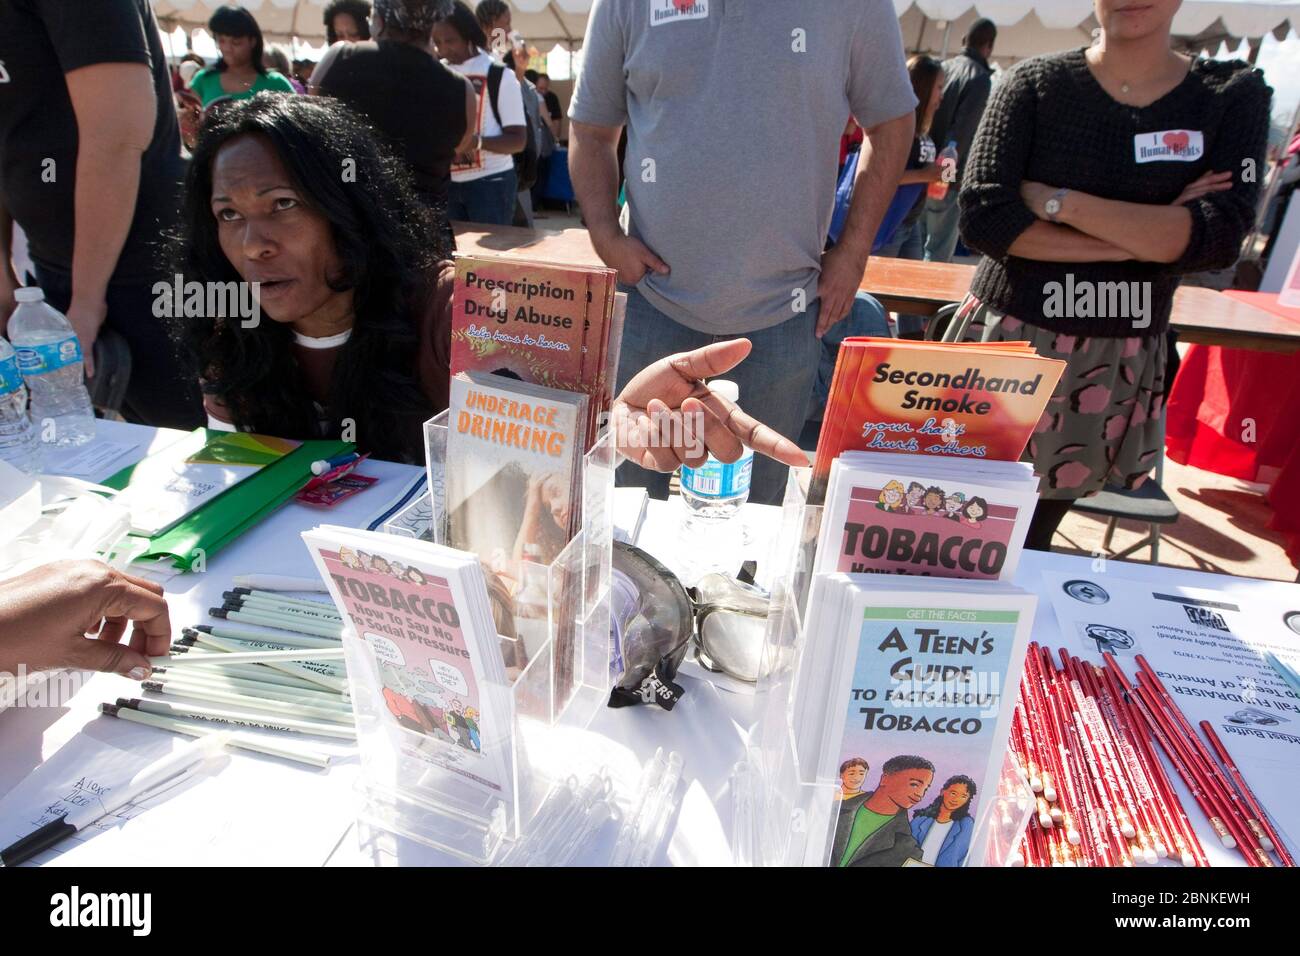 Austin Texas USA, January 21, 2013: Woman talks to passer-by about health-related brochures covering facts for teens about tobacco use, prescription drug abuse, and alcohol use during outdoor festival at small college campus. Stock Photo